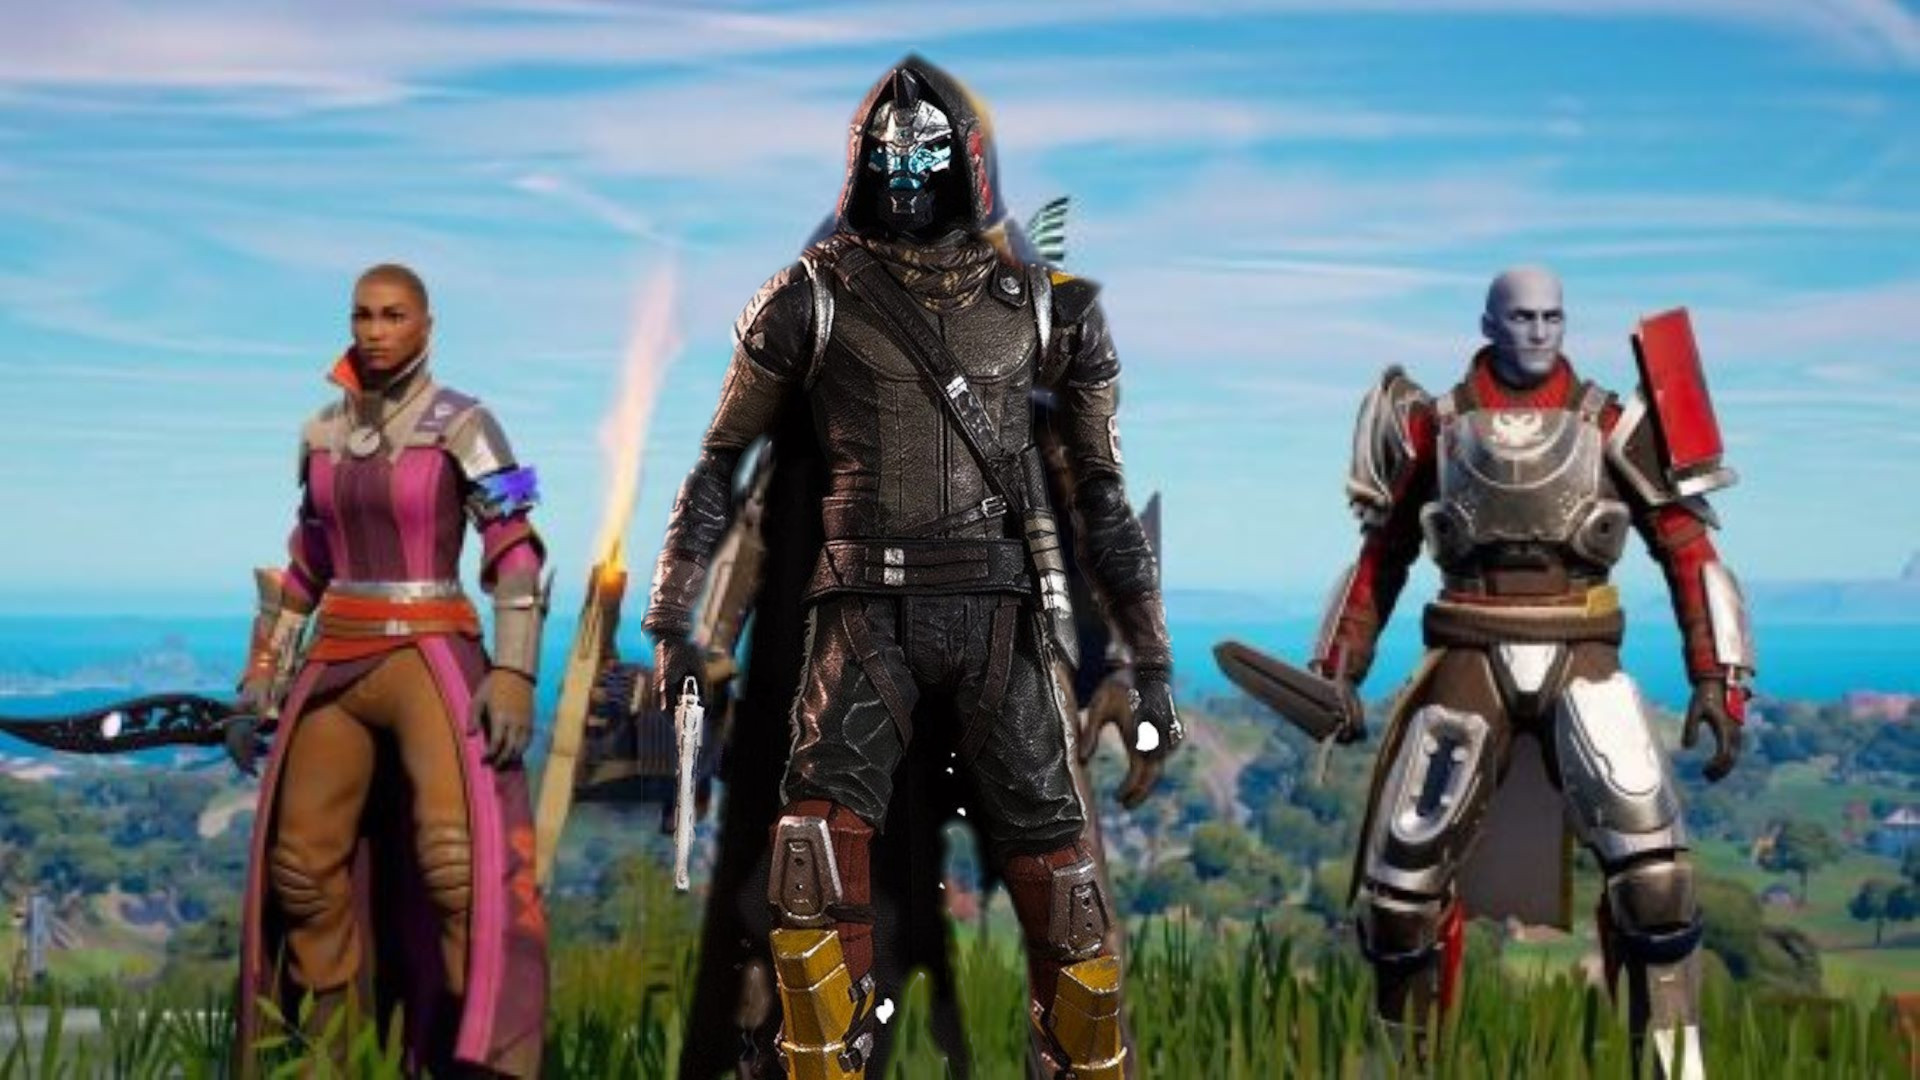 Fortnite should immortalize Destiny 2's Cayde-6 with a skin